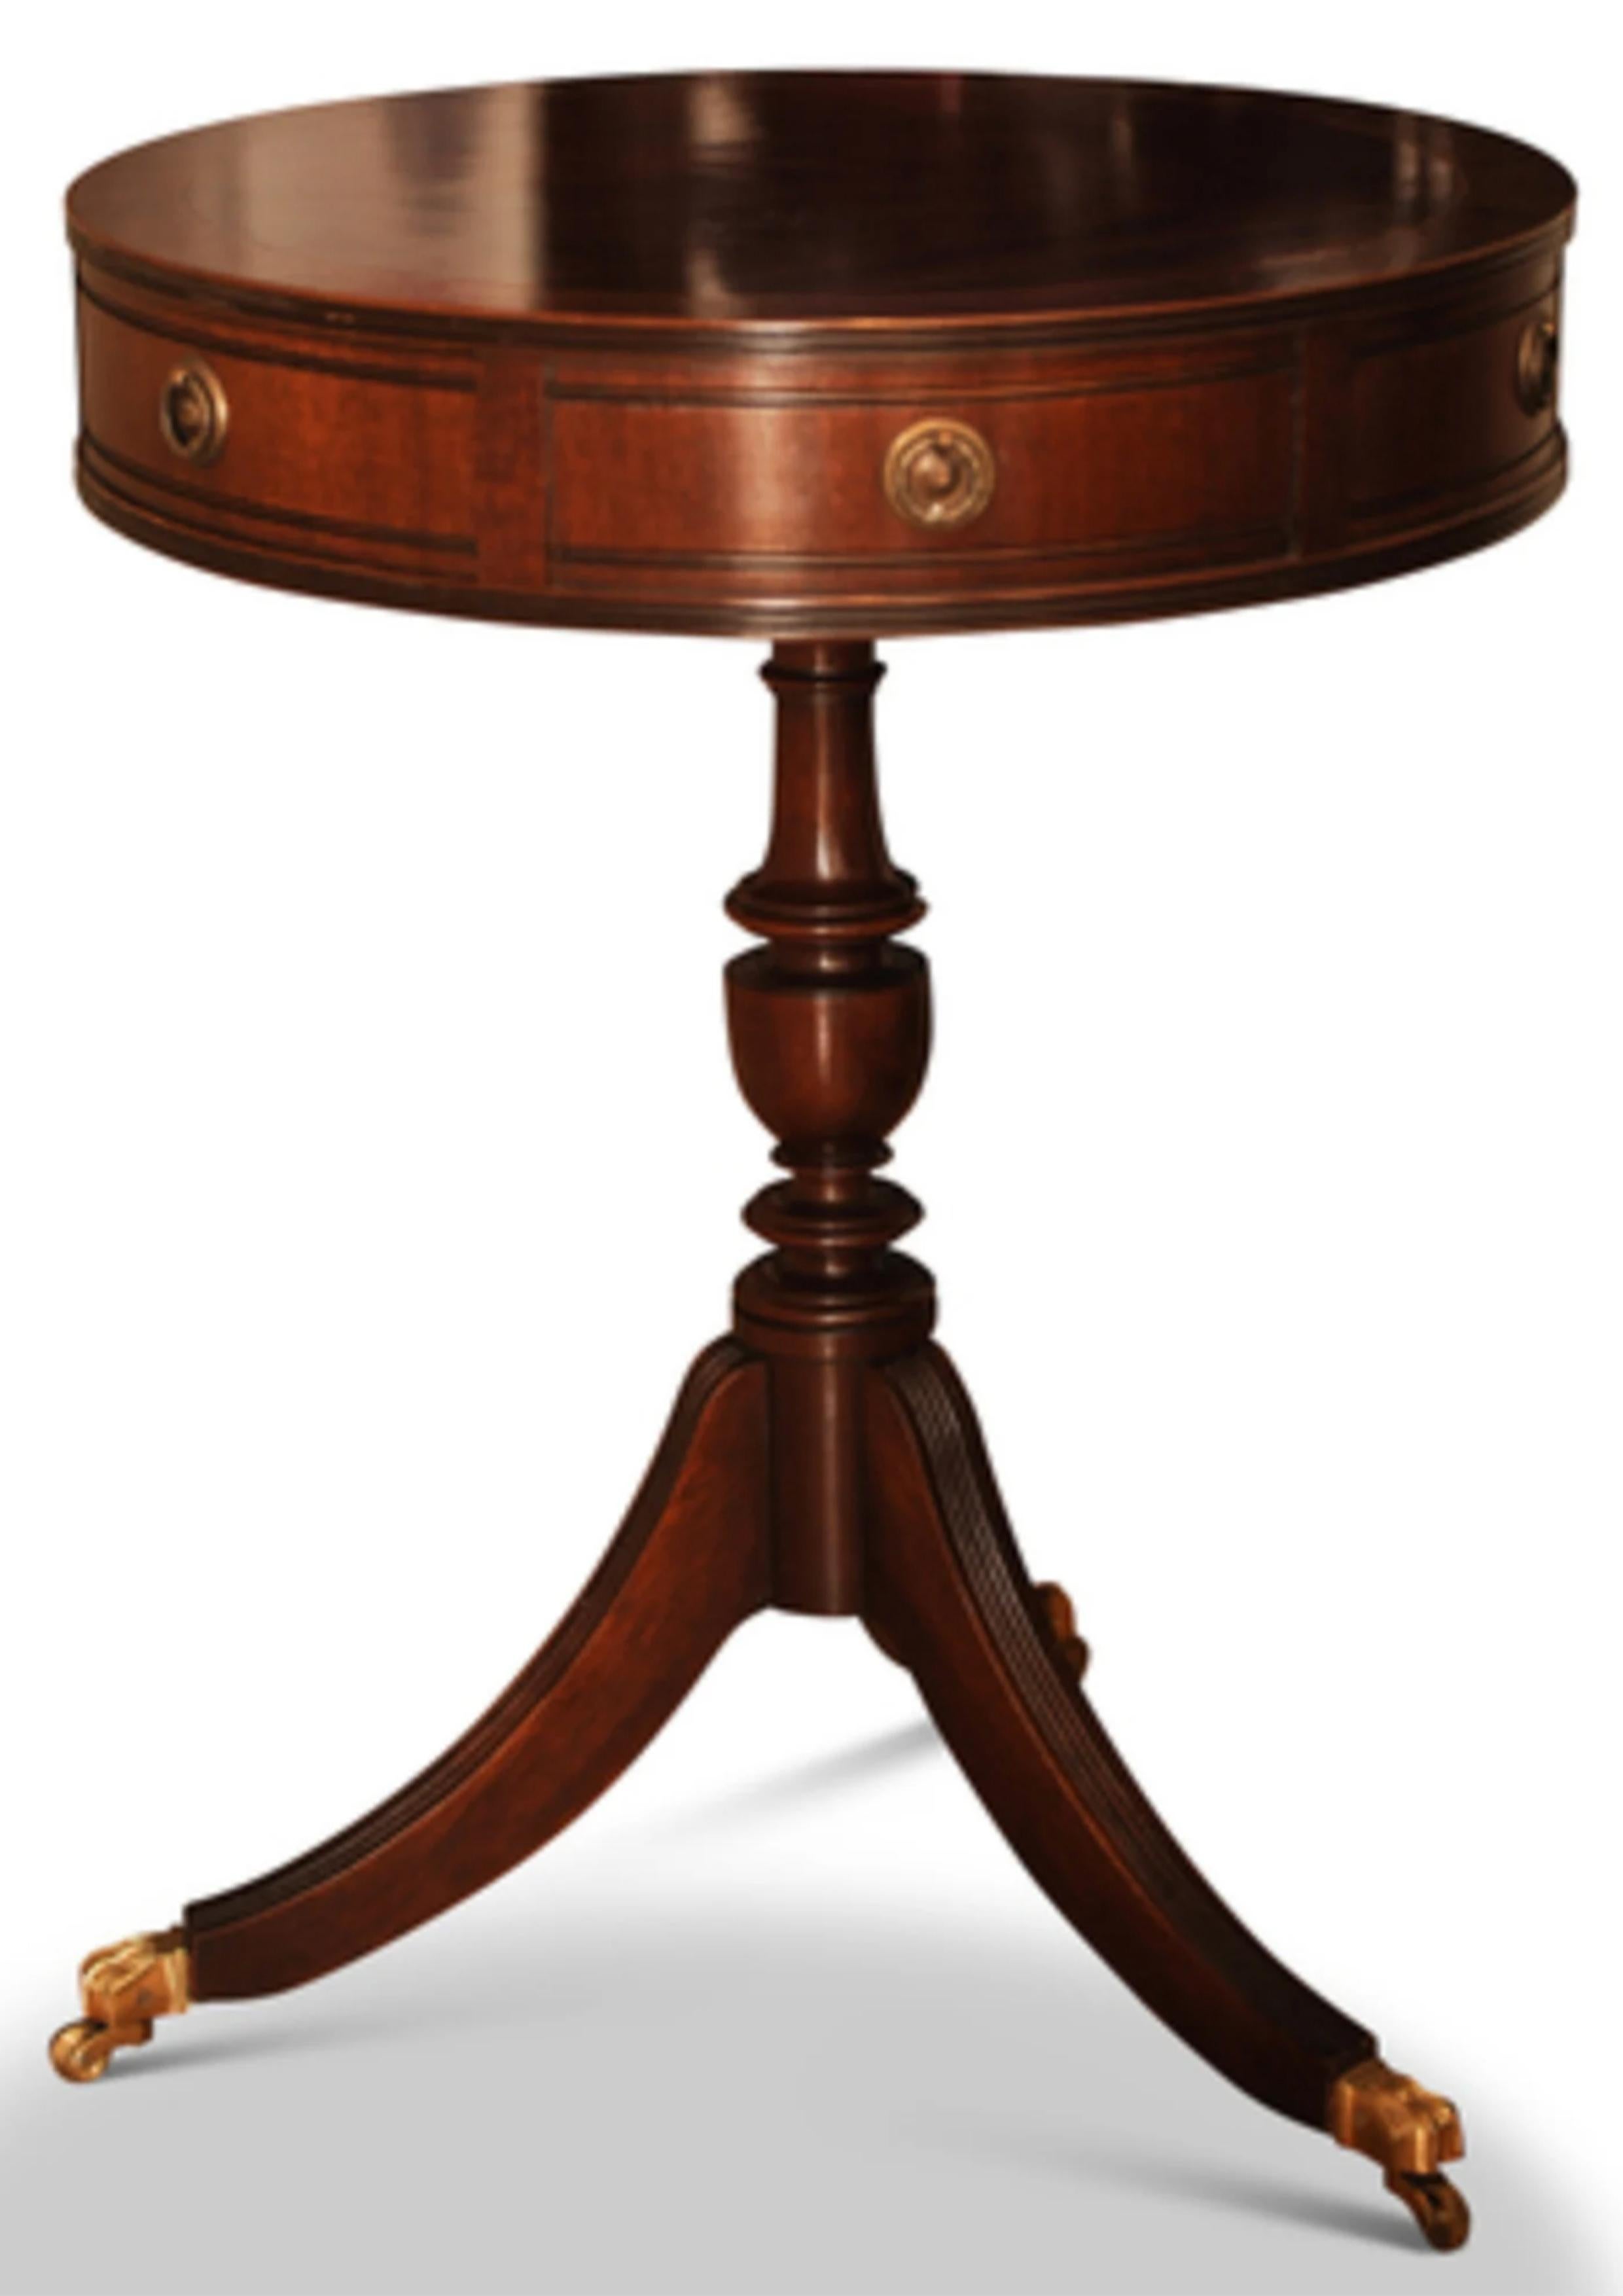 British Kennedy For Harrods Regency Circular Drum Table With Brass Fixtures and Paw Feet For Sale